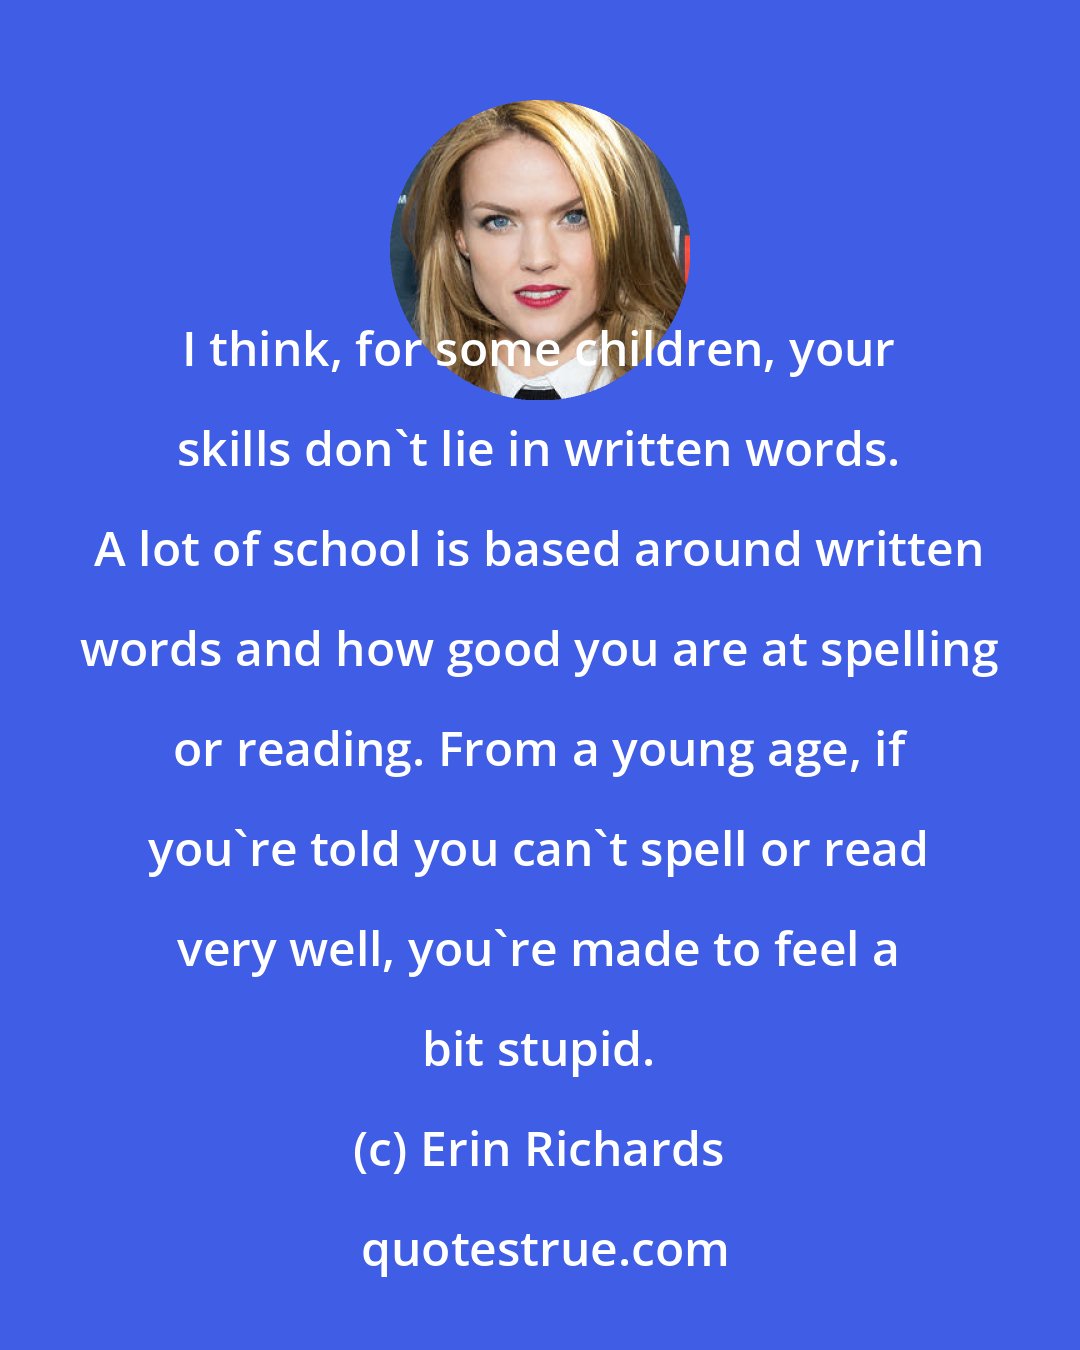 Erin Richards: I think, for some children, your skills don't lie in written words. A lot of school is based around written words and how good you are at spelling or reading. From a young age, if you're told you can't spell or read very well, you're made to feel a bit stupid.